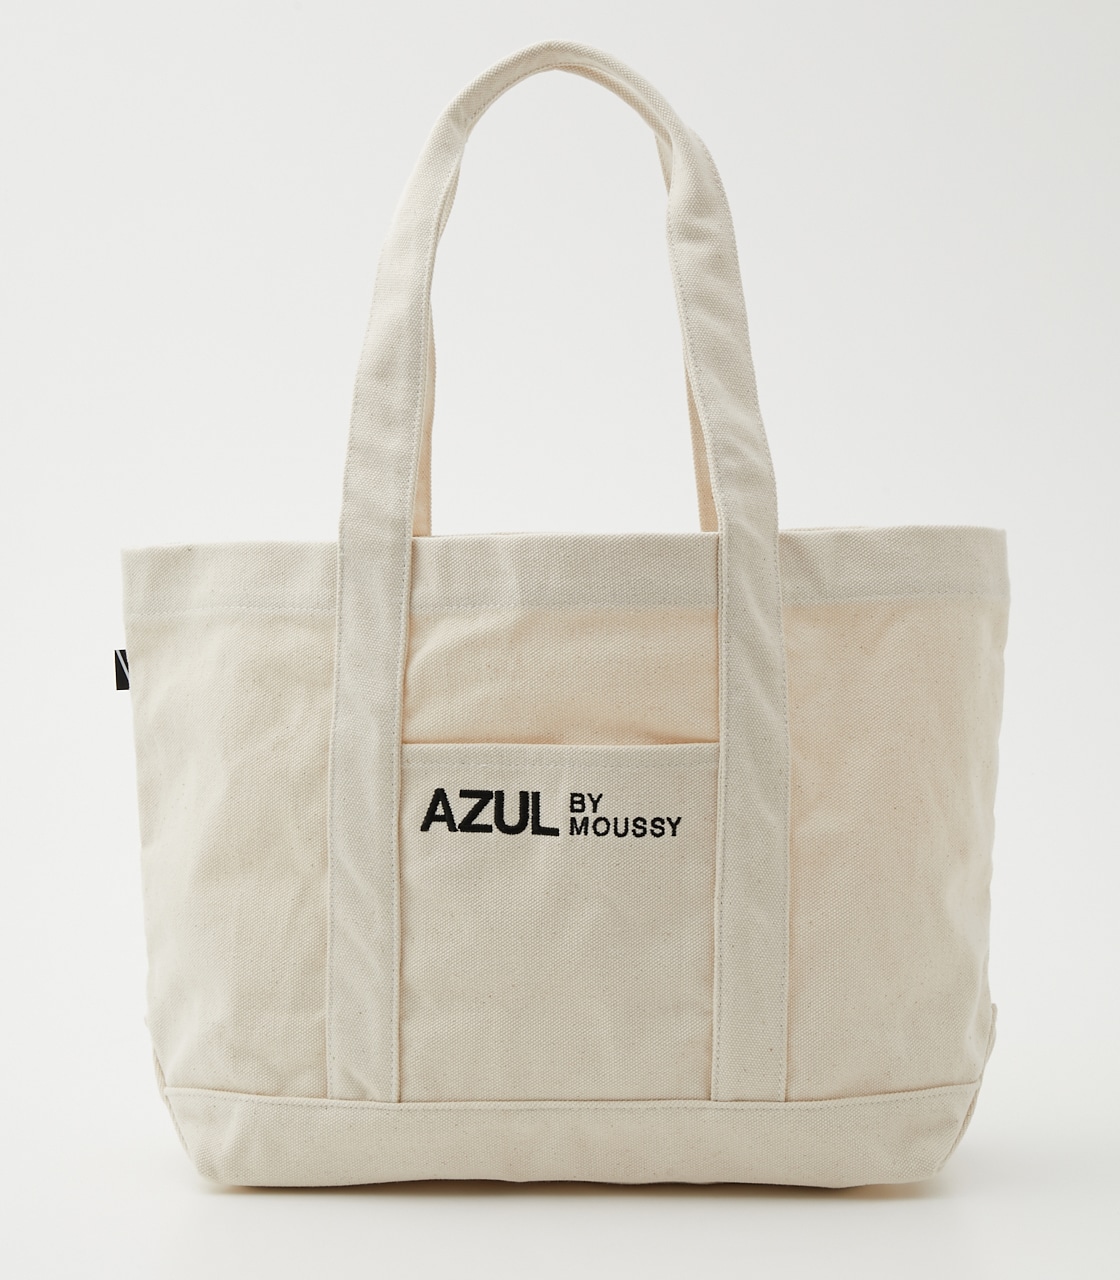 AZUL CANVAS BIG TOTE BAG/AZULキャンバスビッグトートバッグ 詳細画像 O/WHT 2